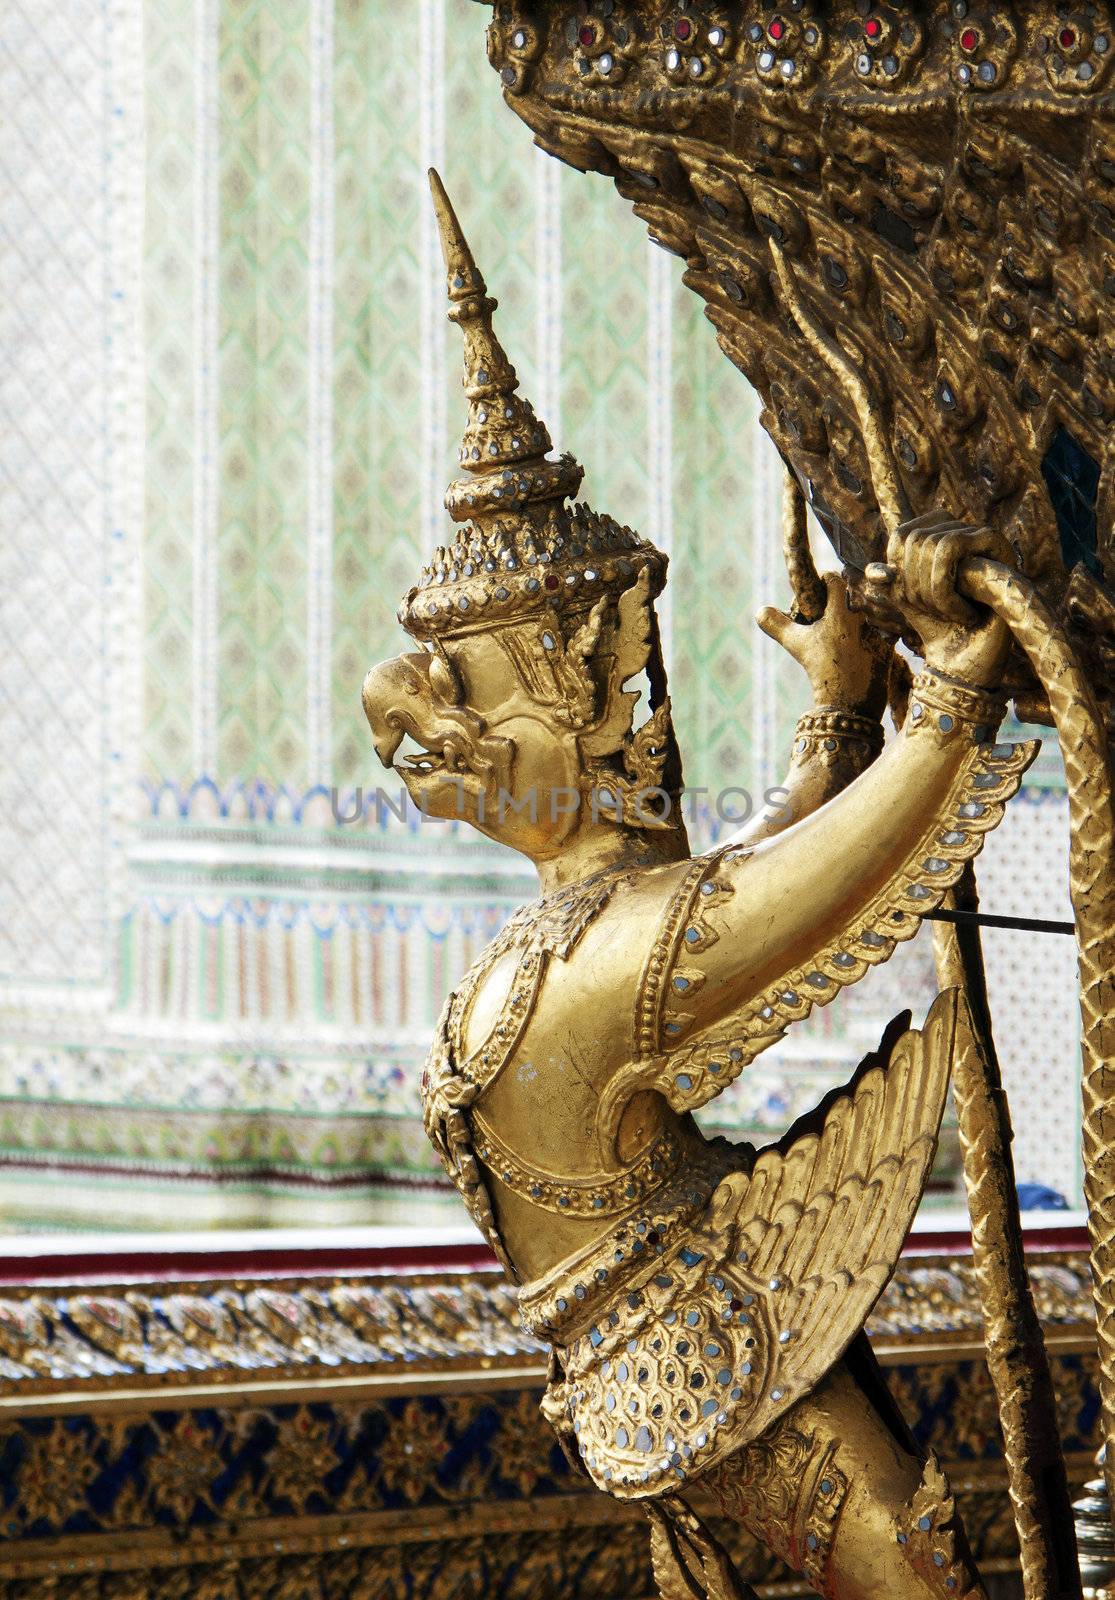 statue in grand palace temple bangkok thailand